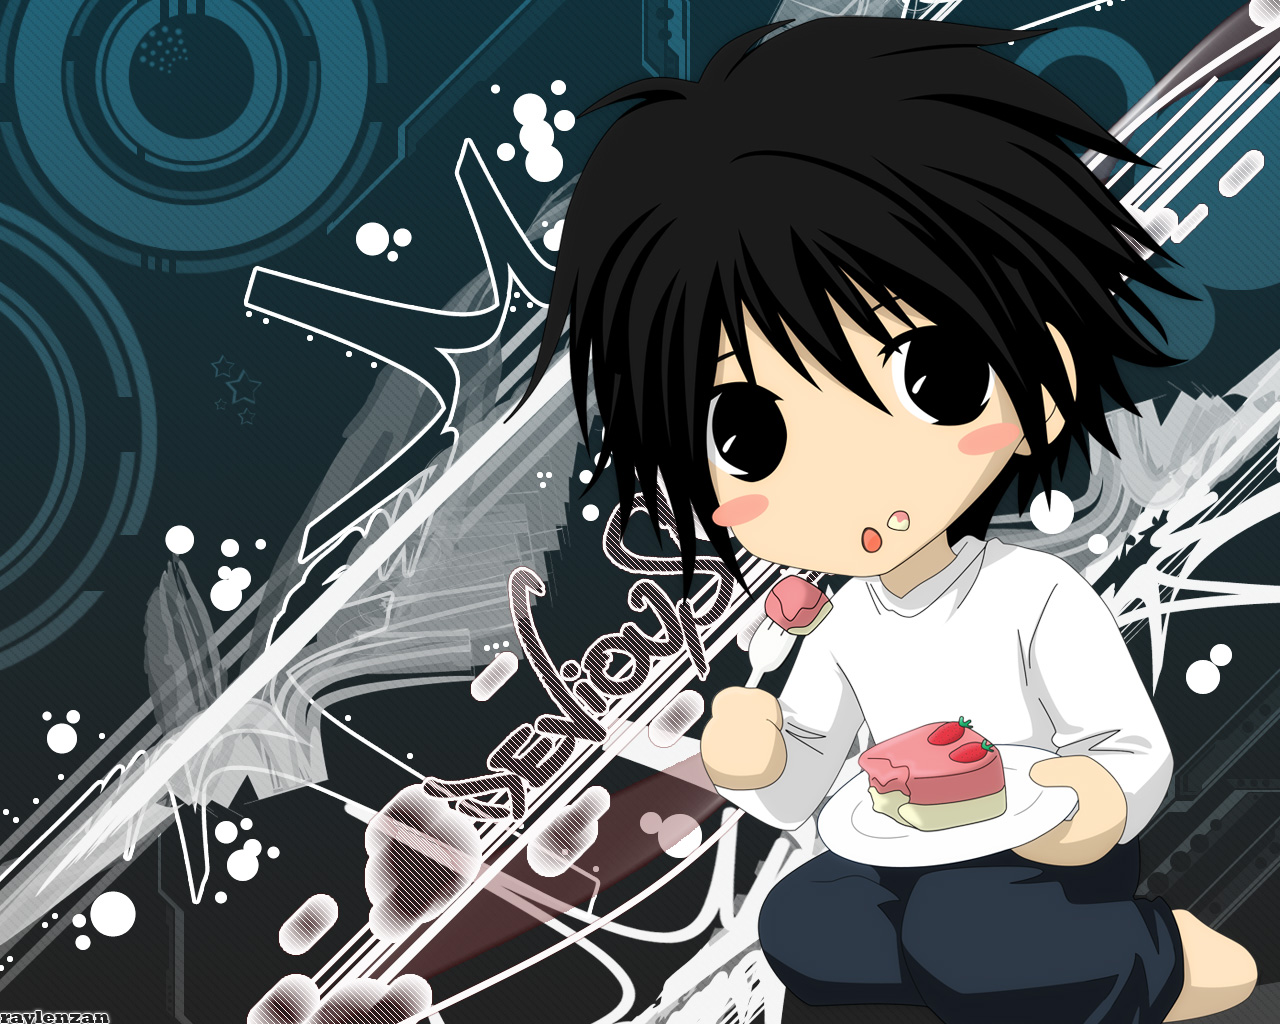  death note wallpaper hd  HD Photo Wallpaper Collection HD WALLPAPERS